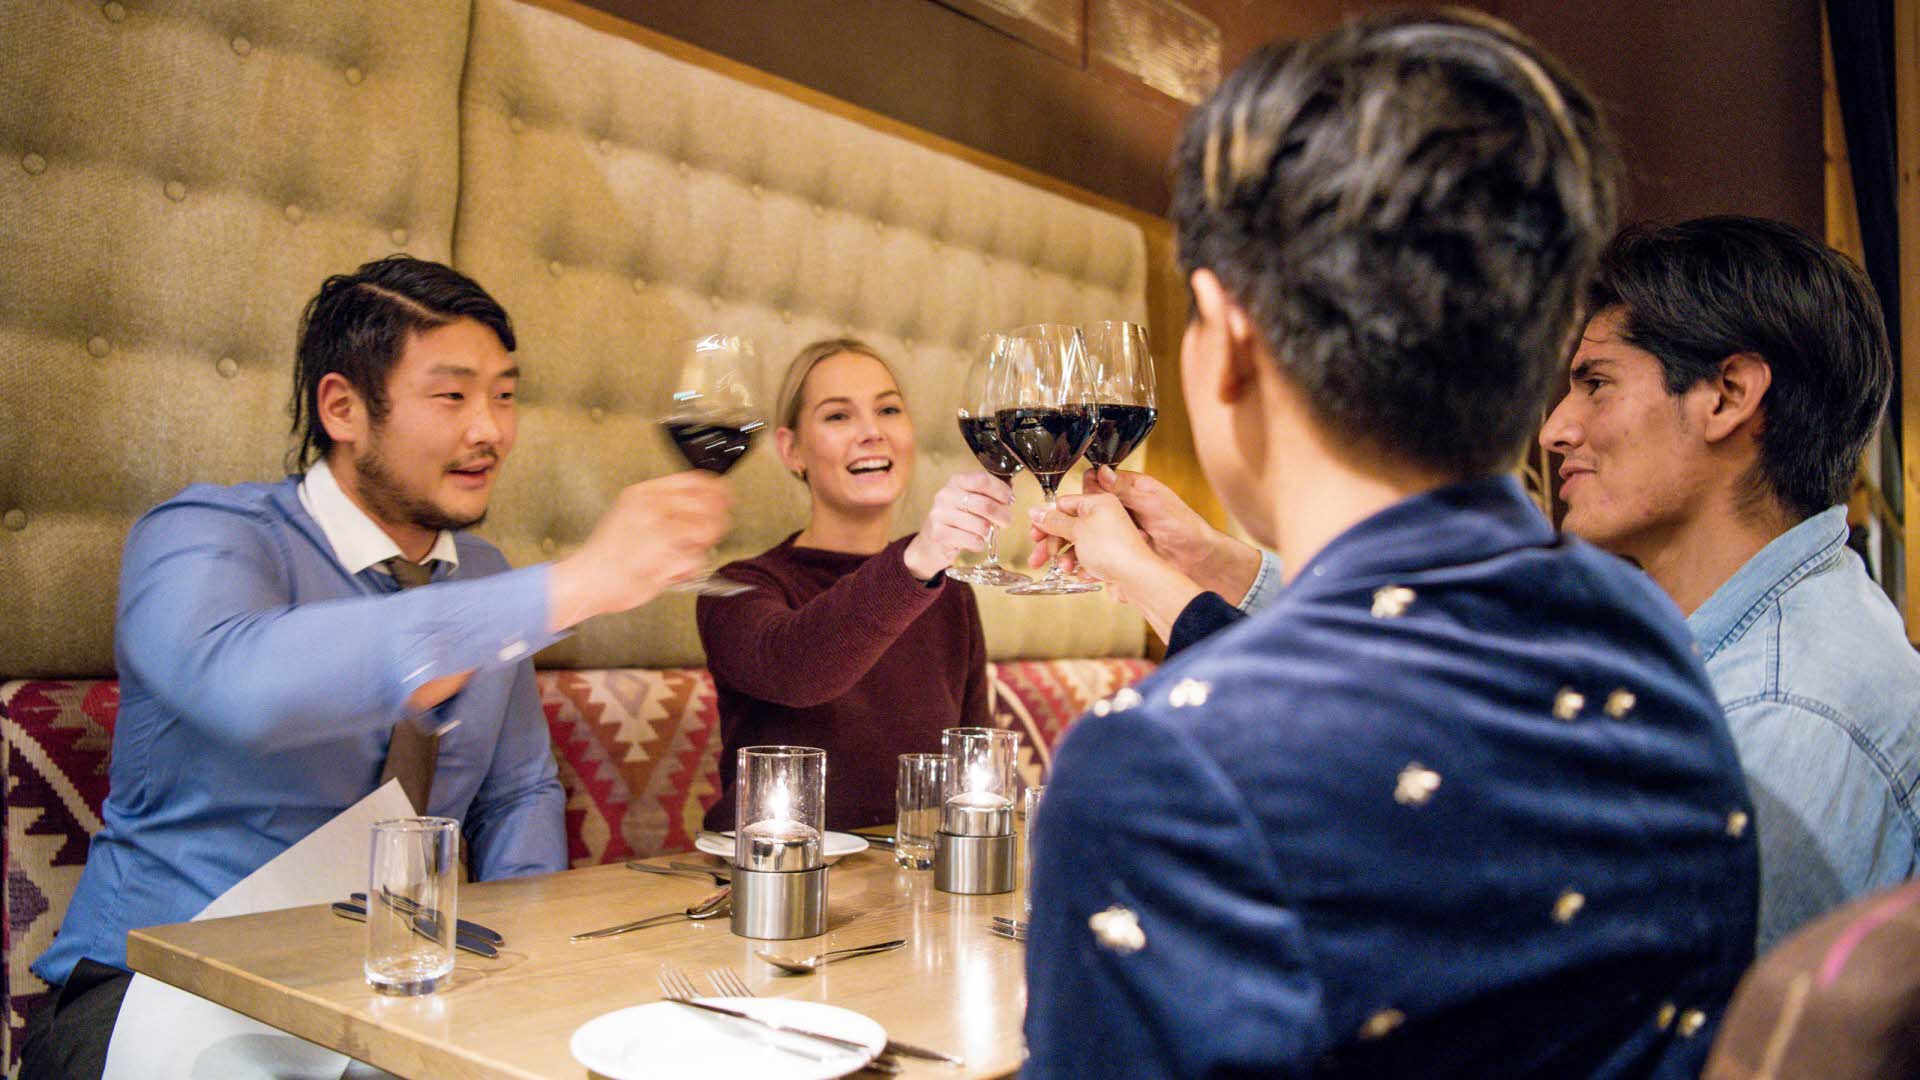 Four people toasting and smiling around a table at Restaurant Arven